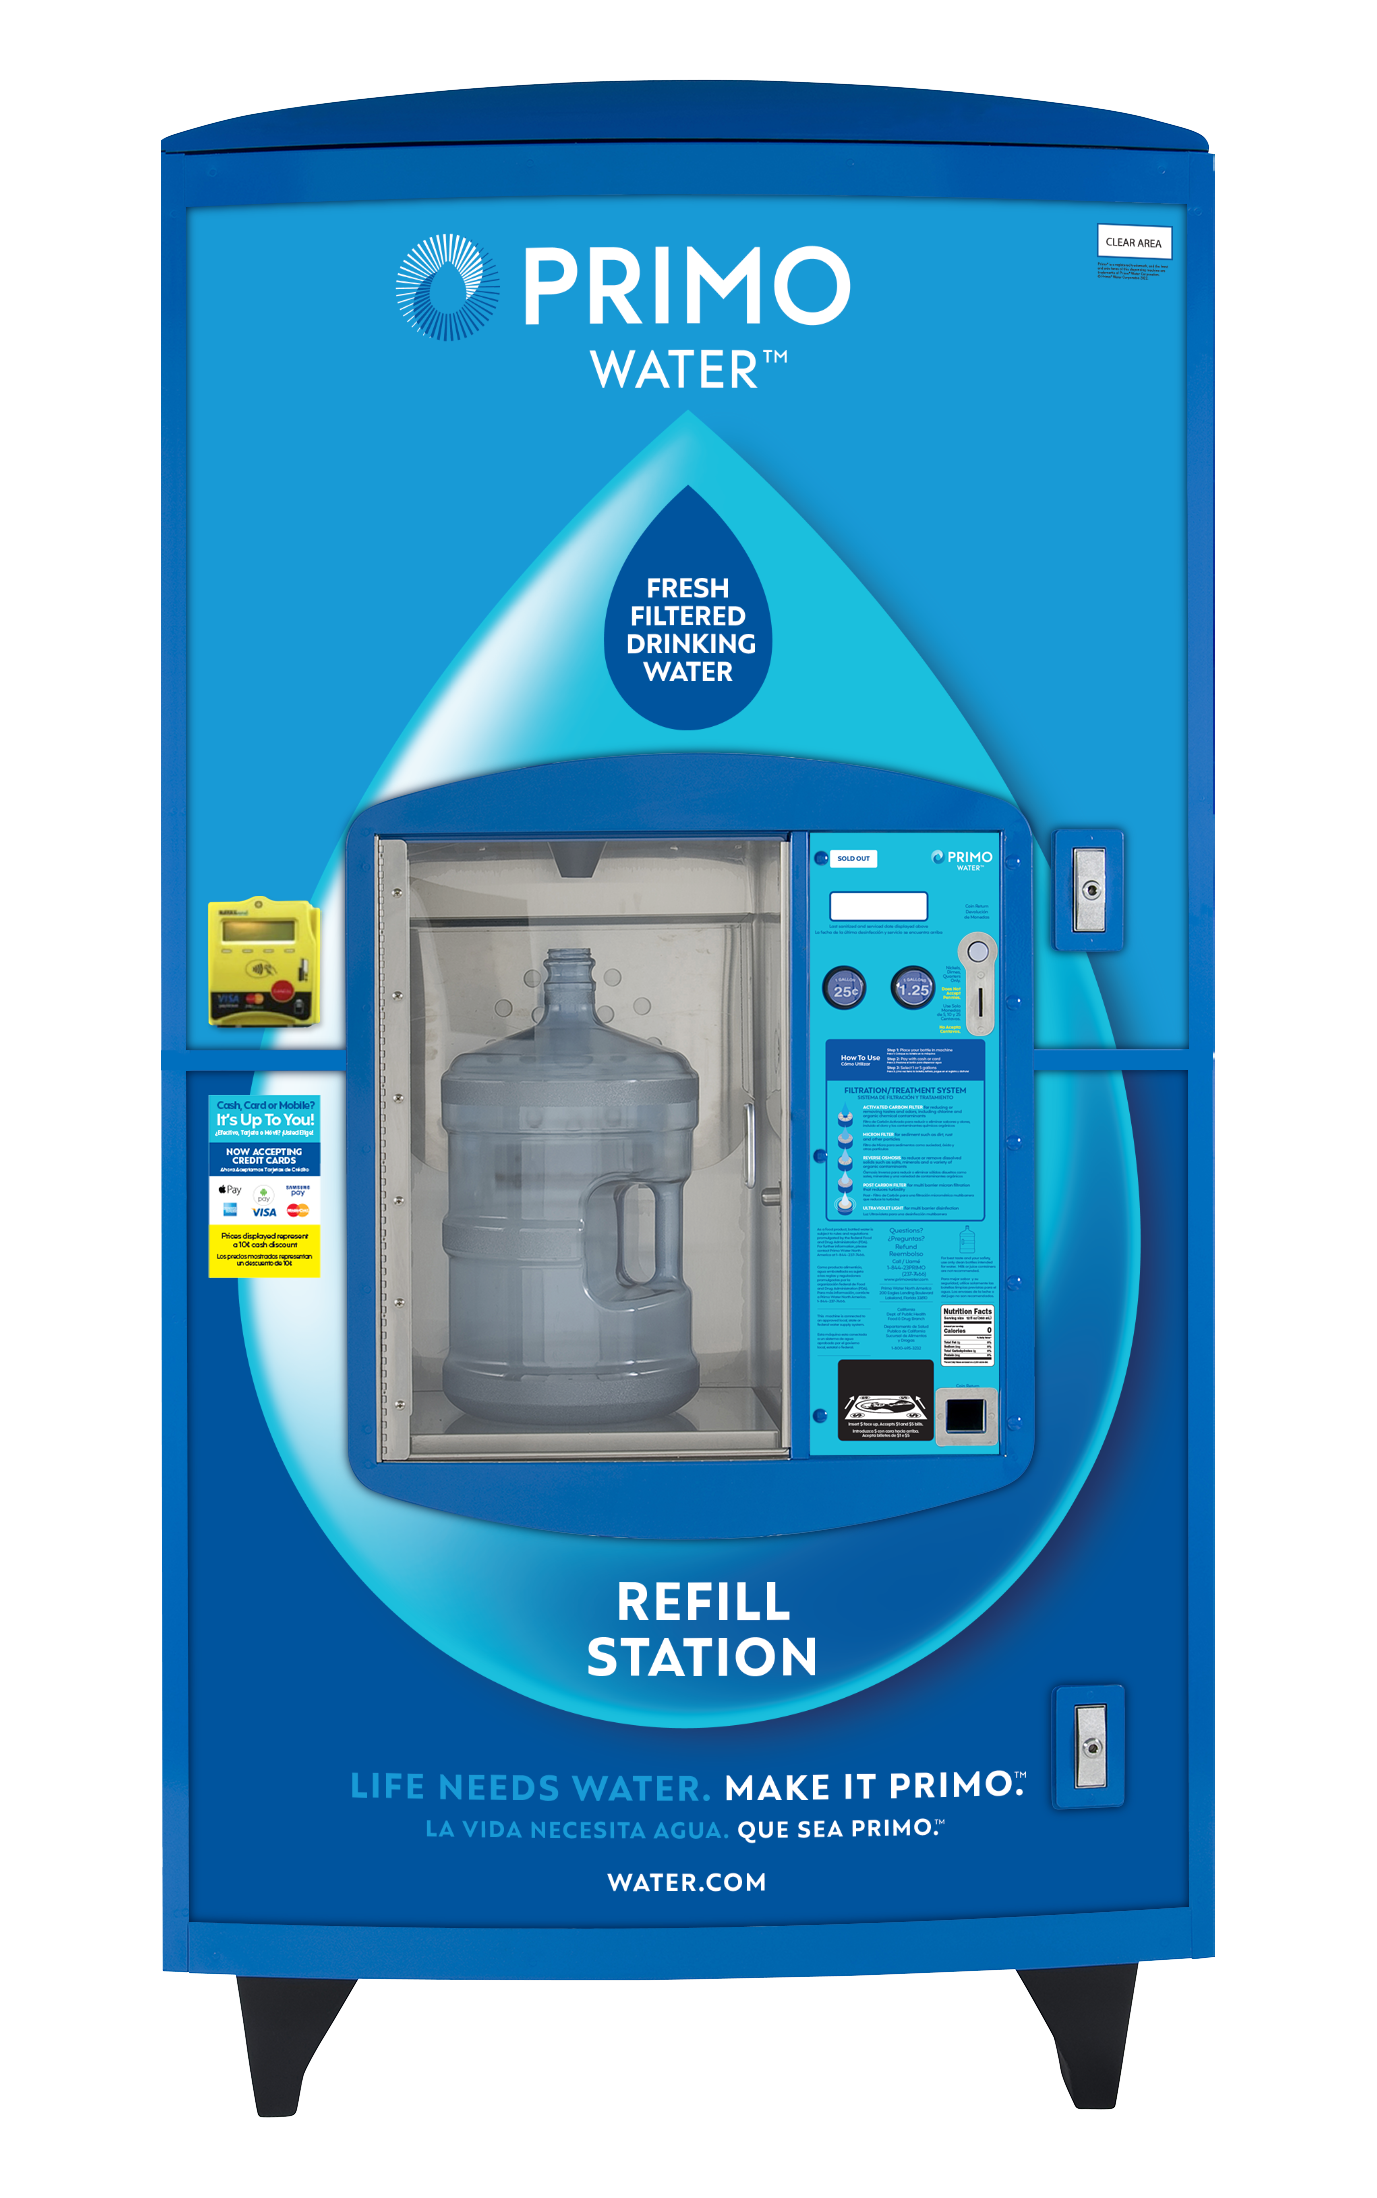 Image of a Primo refill station